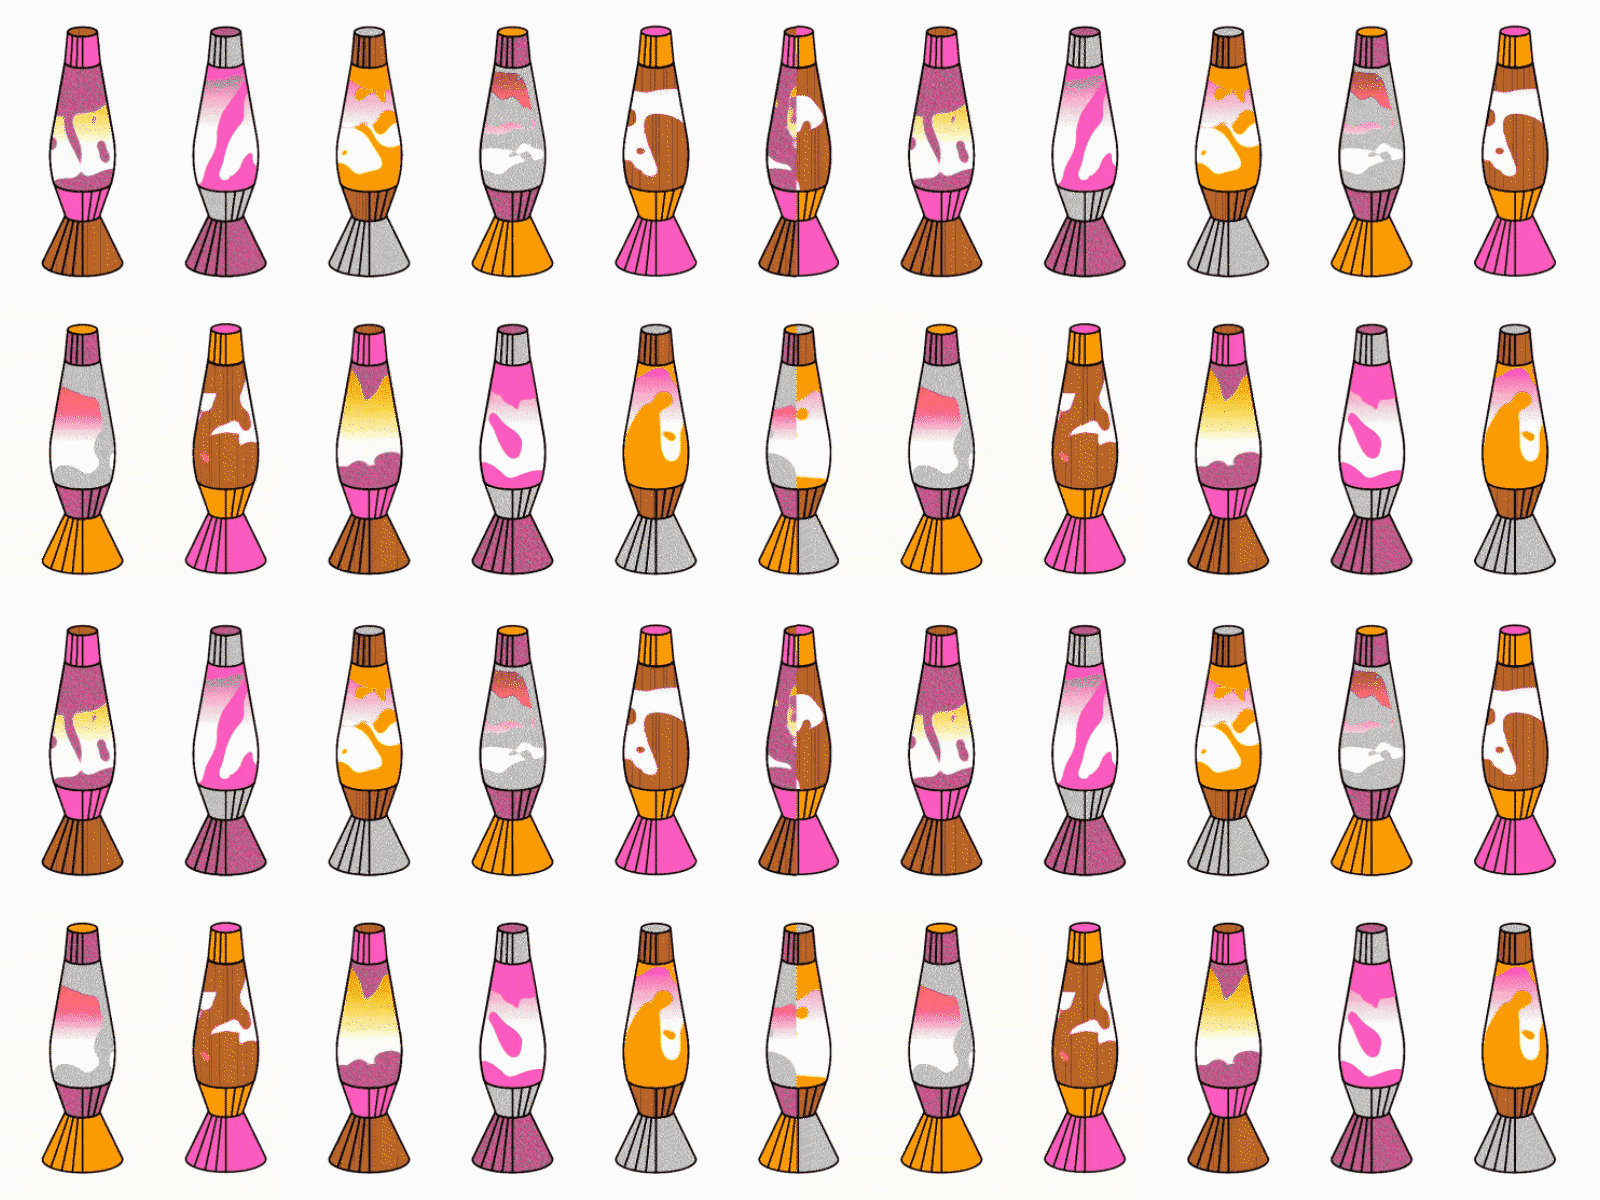 More Lava Lamps 2d animation 70sdesign 90s after effects animation blob gif graphic design illustration lava lava lamp lavalamp motion graphics old school vector illustration